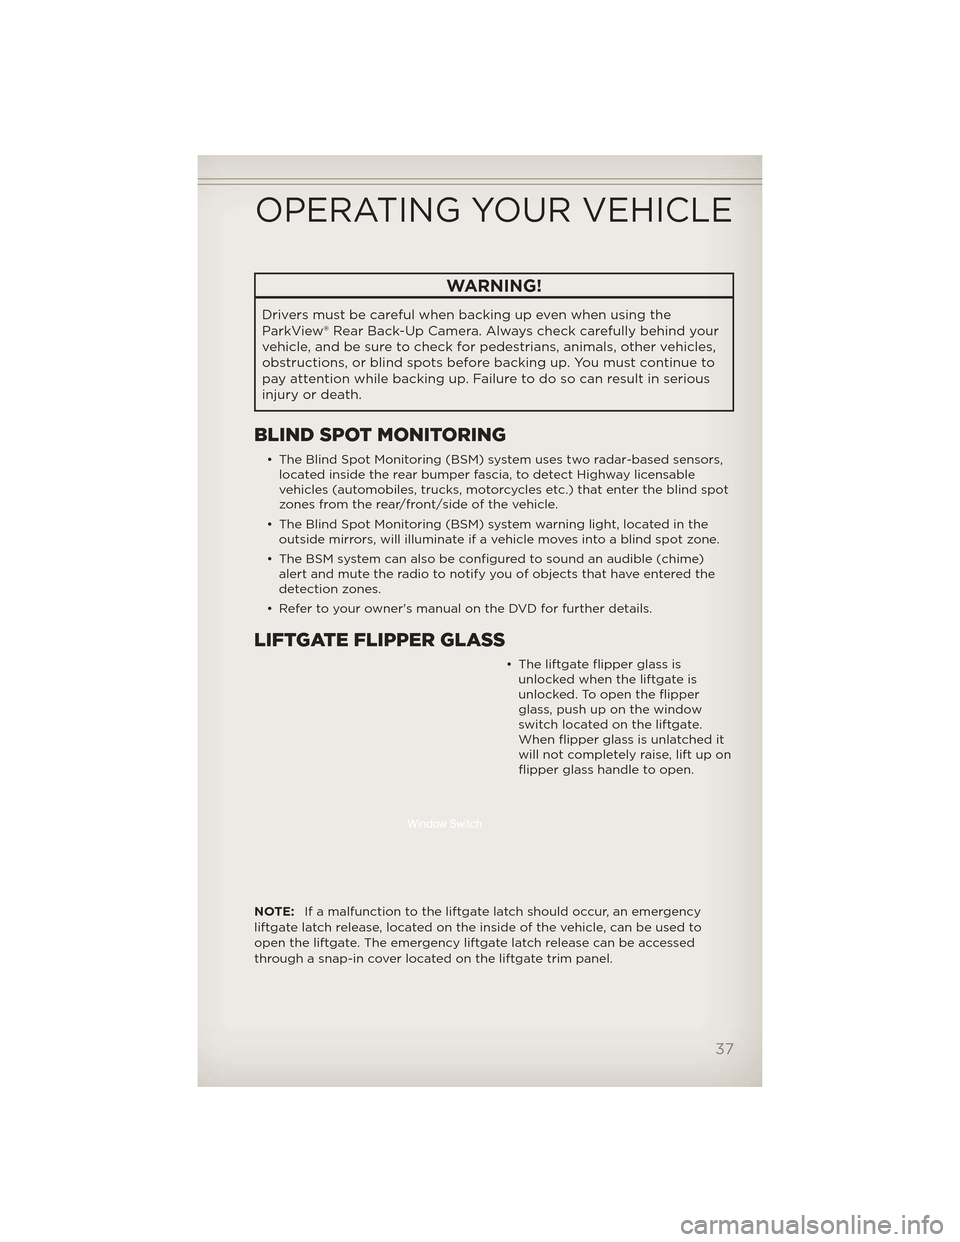 JEEP GRAND CHEROKEE 2012 WK2 / 4.G Owners Guide WARNING!
Drivers must be careful when backing up even when using the
ParkView® Rear Back-Up Camera. Alwayscheck carefully behind your
vehicle, and be sure to check for pedestrians, animals, other veh